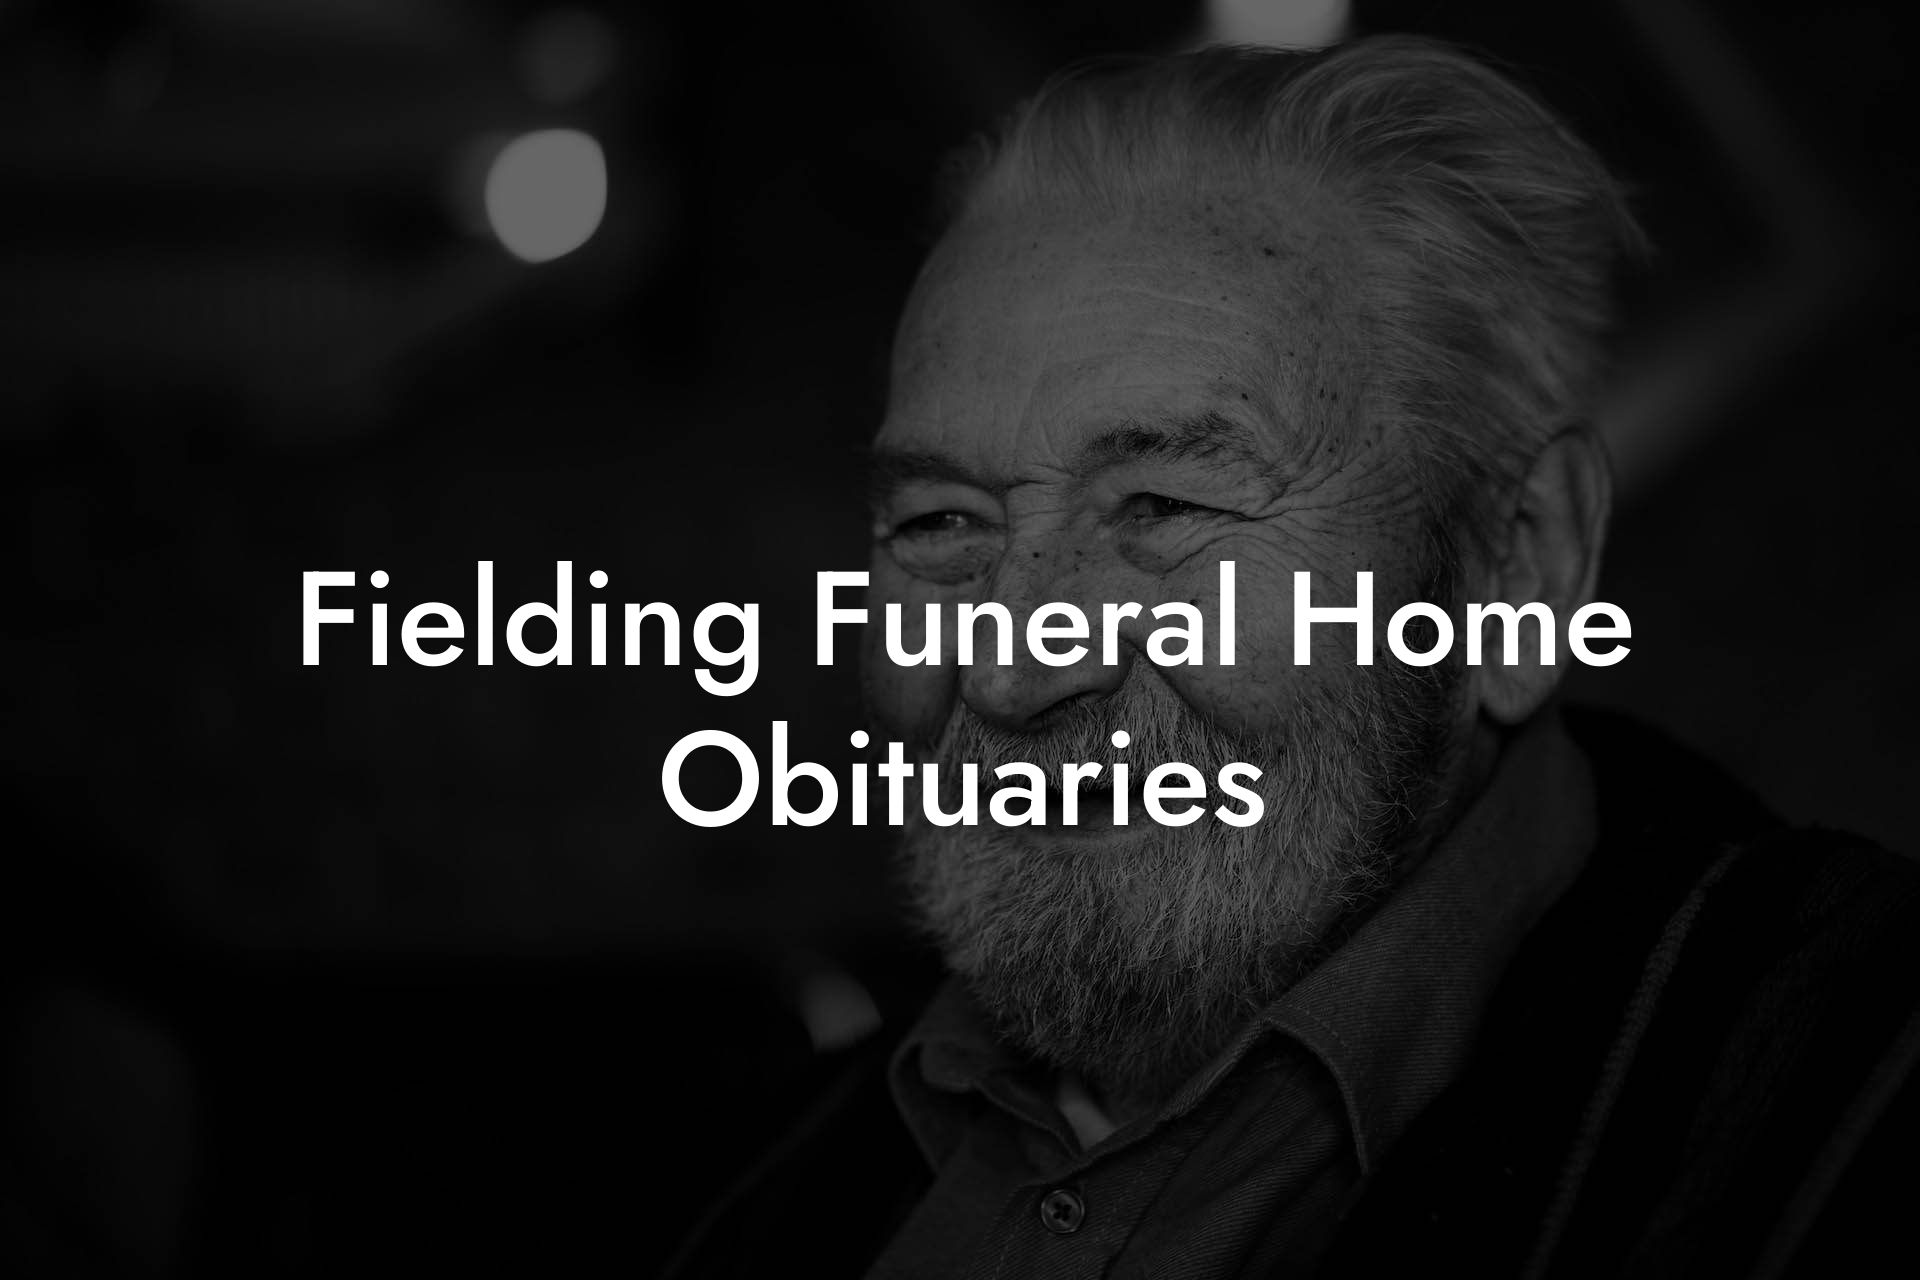 Fielding Funeral Home Obituaries